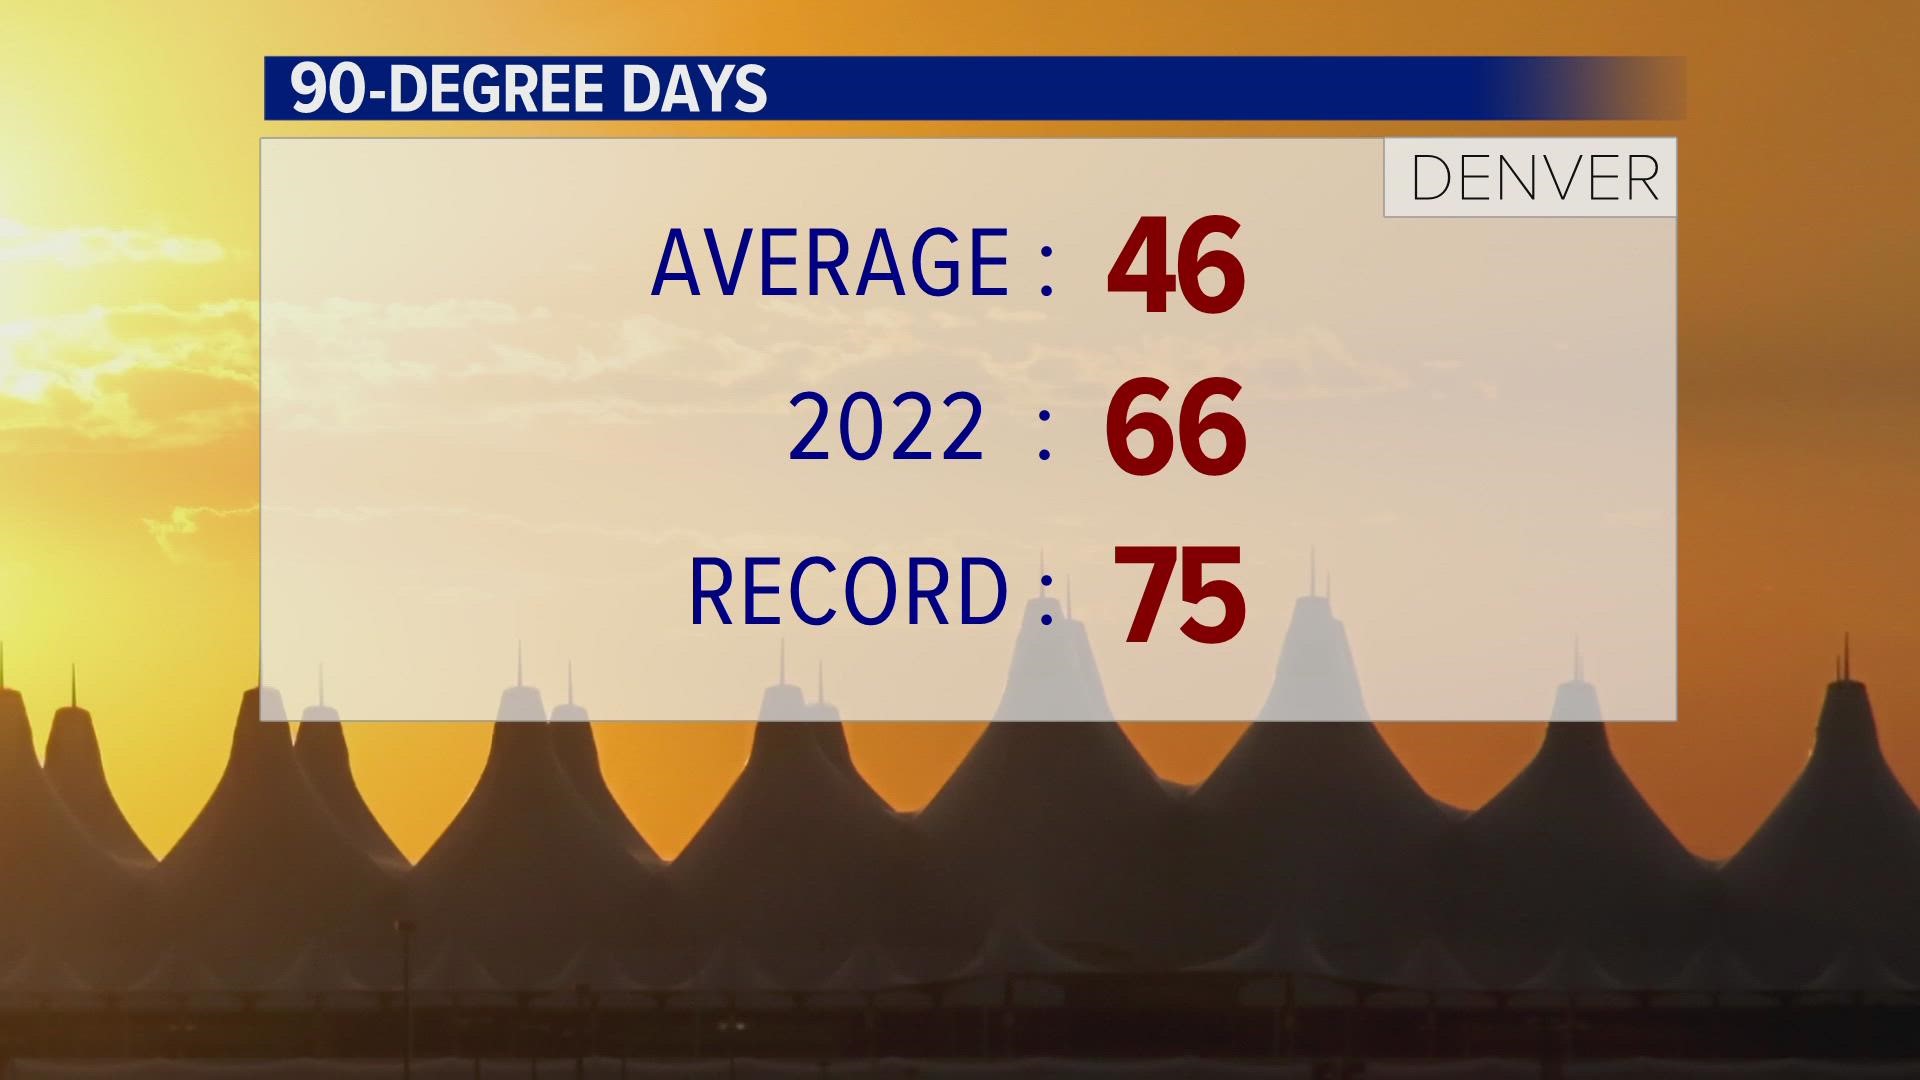 Summer 2022 in Denver saw records repeatedly broken. This summer we saw 66 days over 90 degrees.